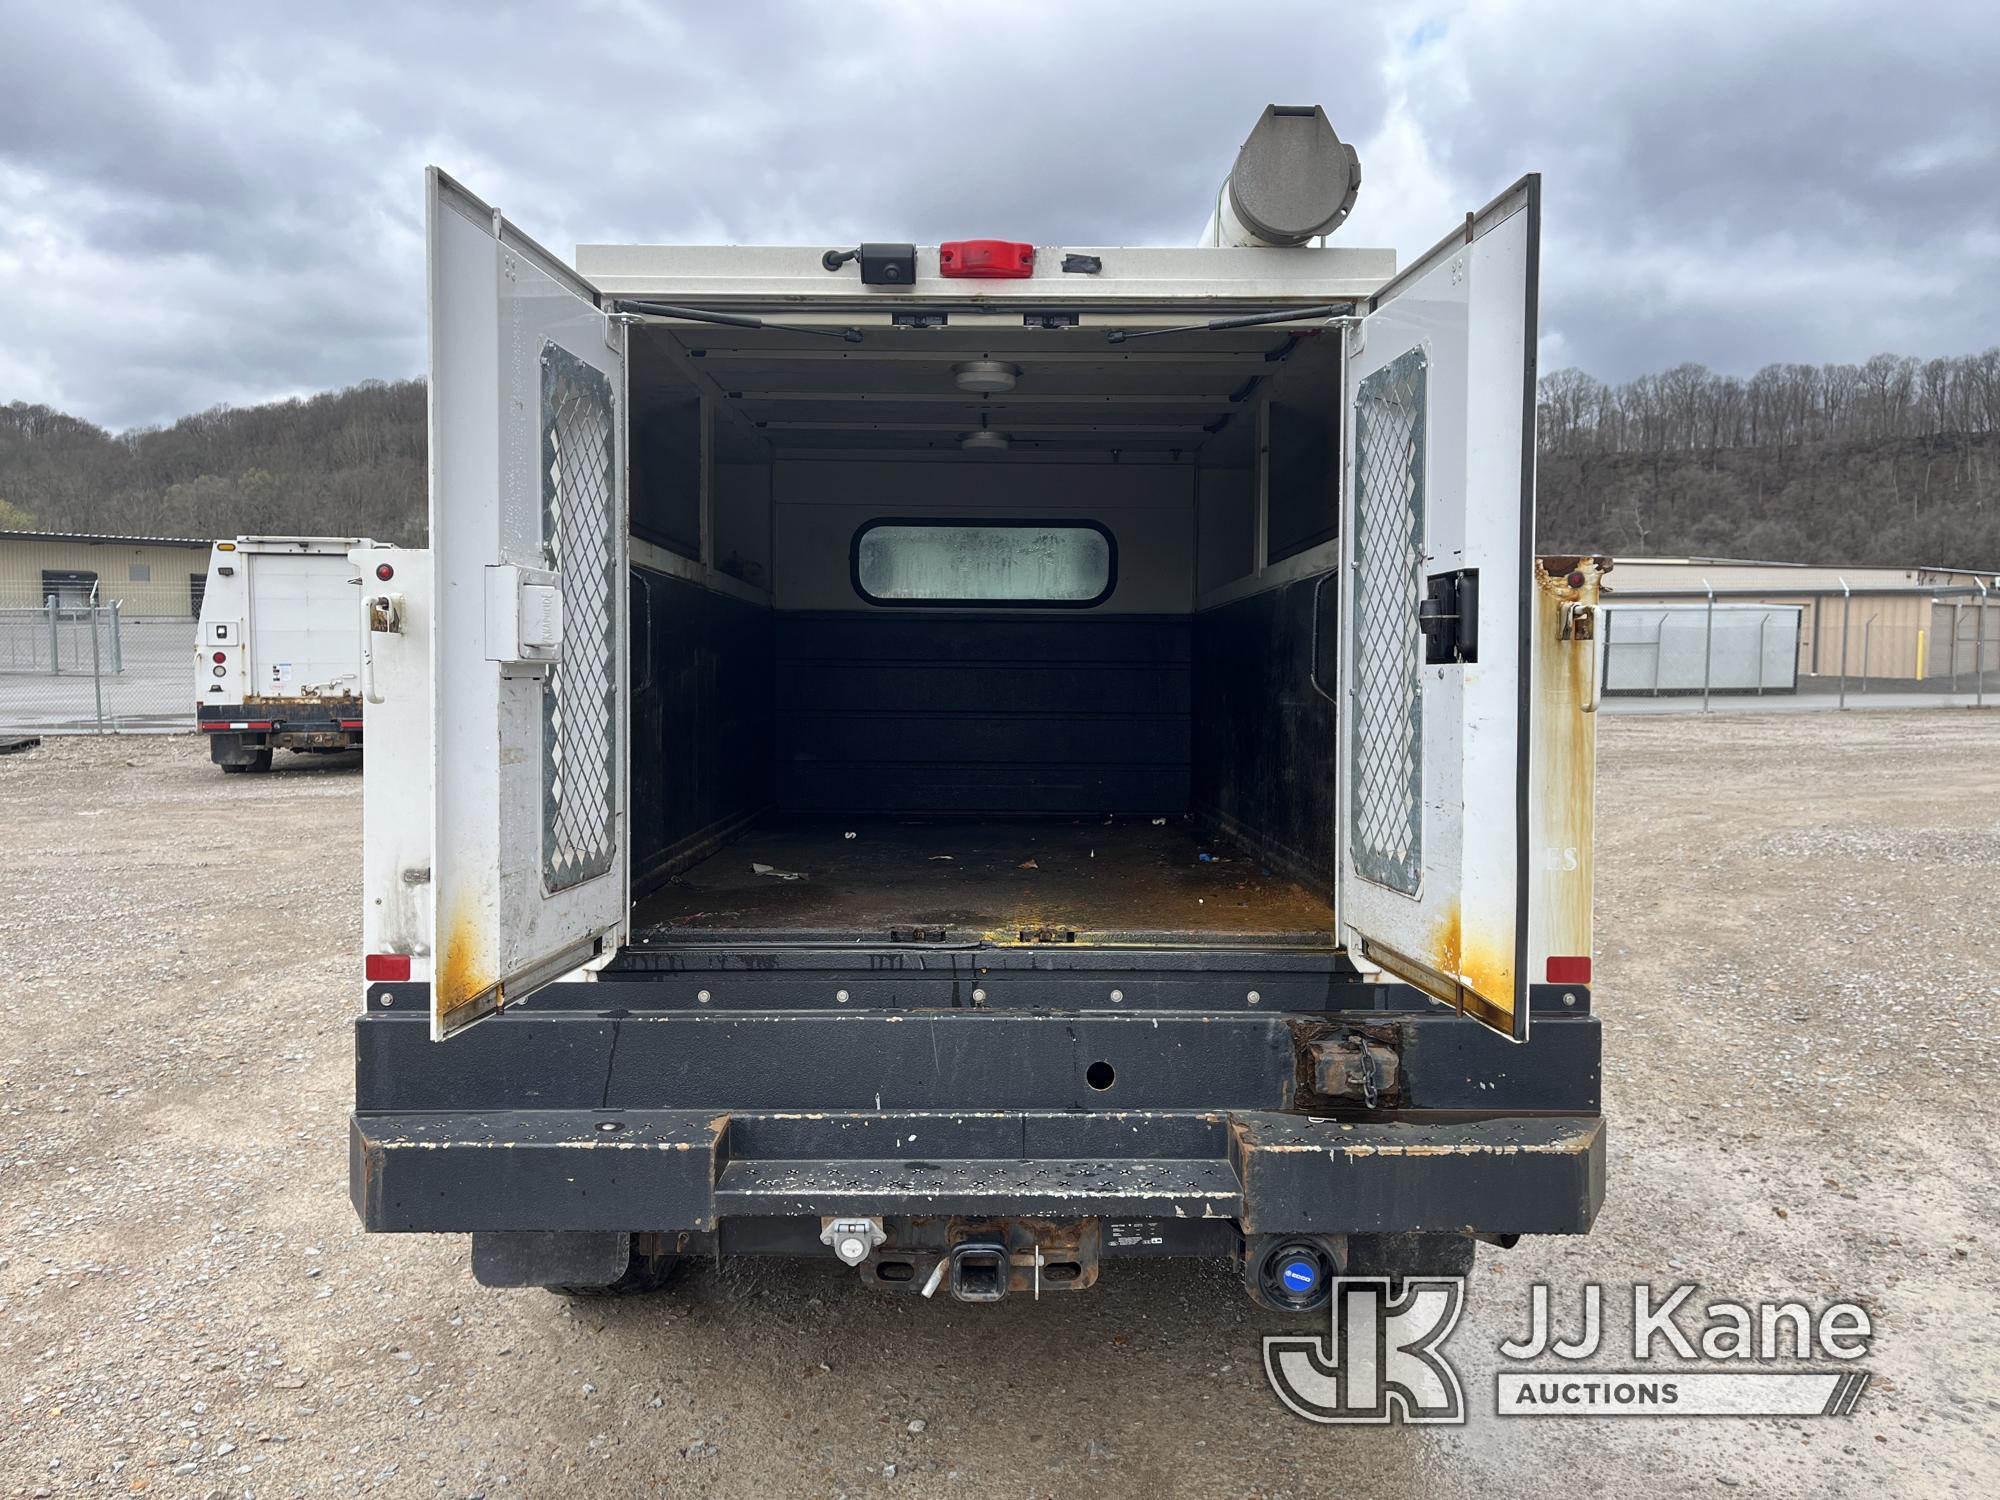 (Smock, PA) 2017 Ford F250 4x4 Extended-Cab Enclosed Service Truck Runs & Moves, Passenger Side Mirr